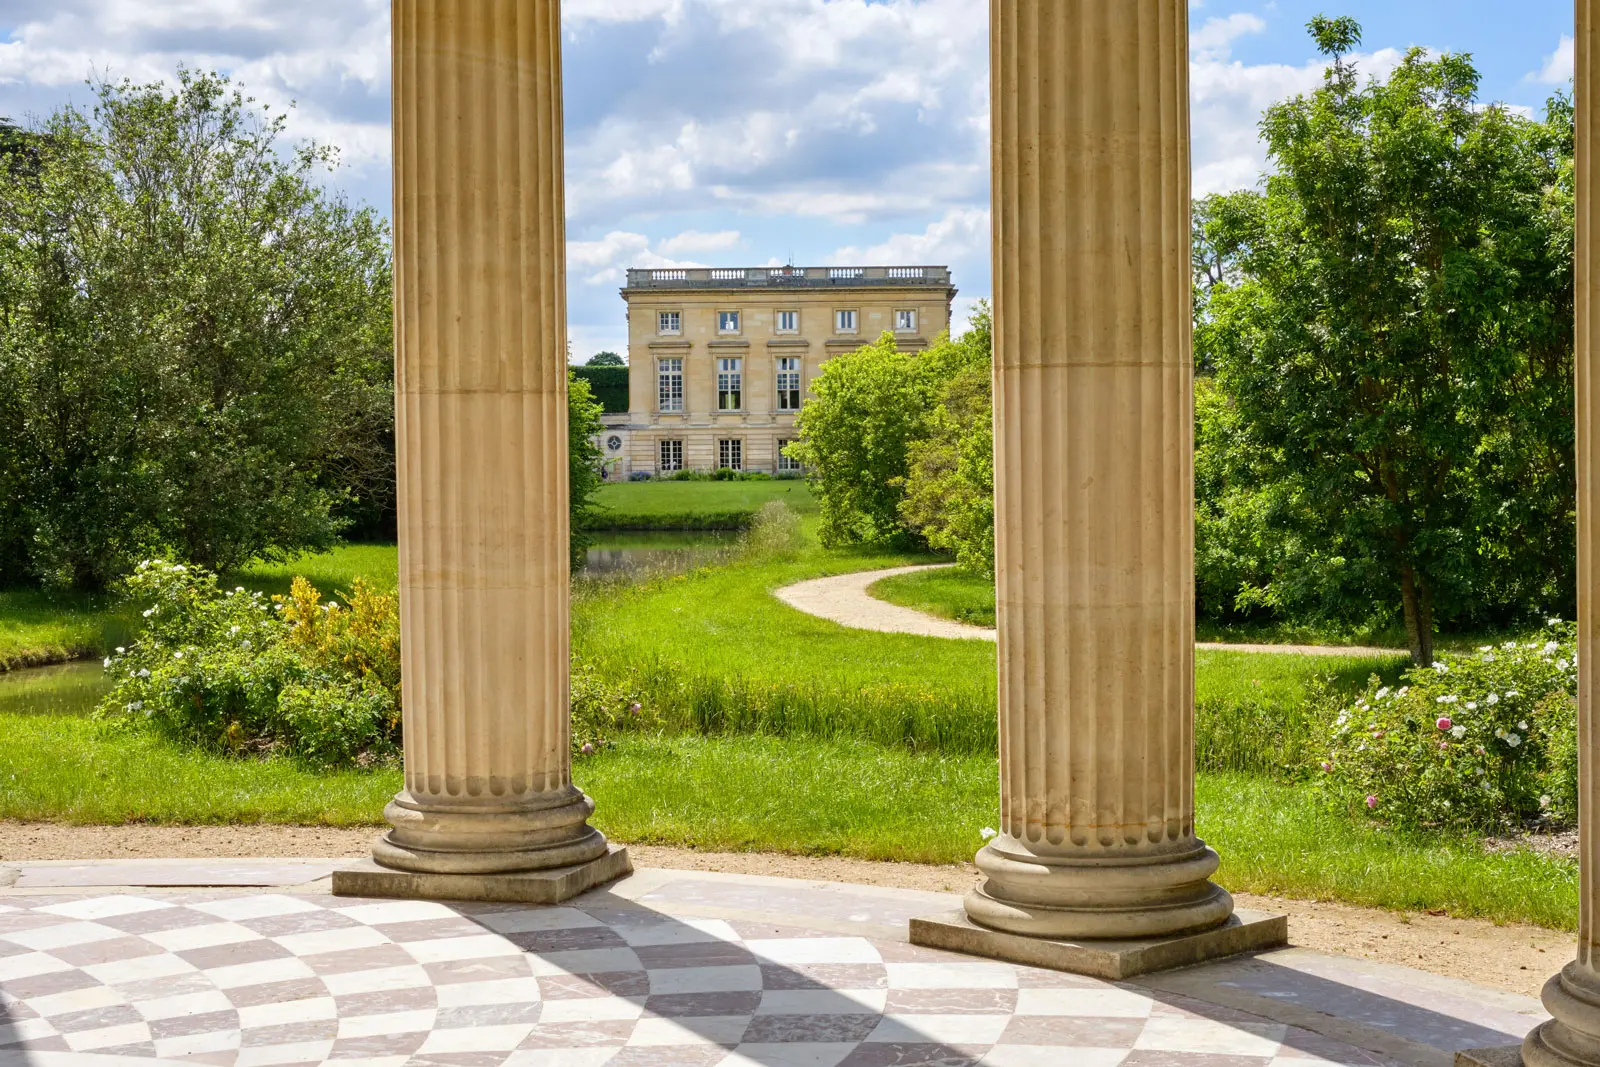 Marie Antoinette Petit Trianon and Temple of Love in the gardens of Versailles castle